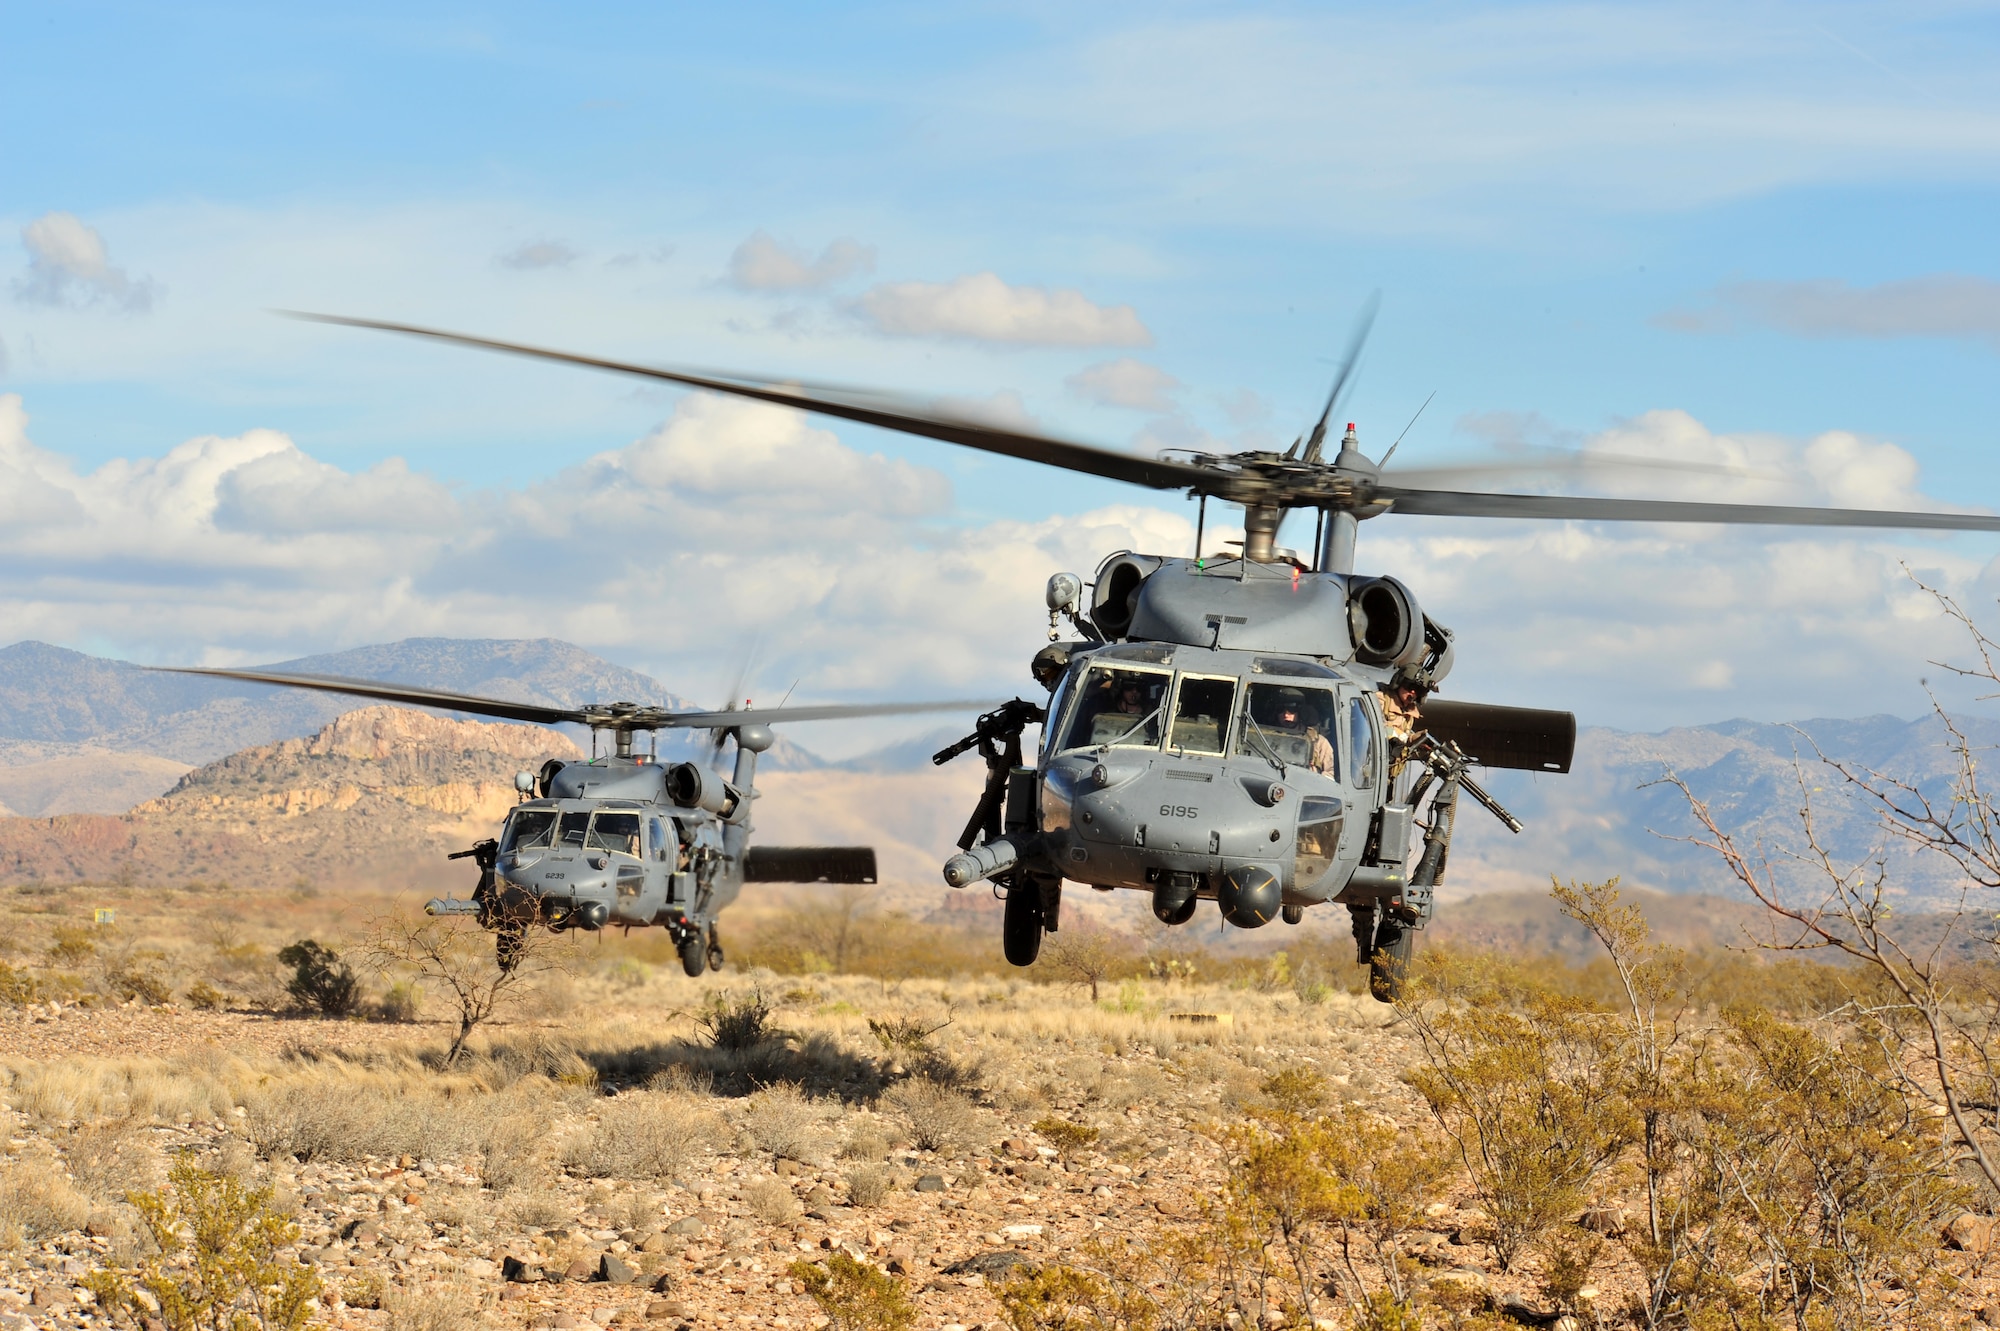 Two HH-60 Pavehawk helicopters land during a personnel recovery training exercise, Angel Thunder 2008. More than 800 ground recovery personnel took part in Angel Thunder 08, the world's largest personnel recovery and combat search and rescue exercise. (U.S. Air Force photo/Senior Airman Noah R. Johnson)